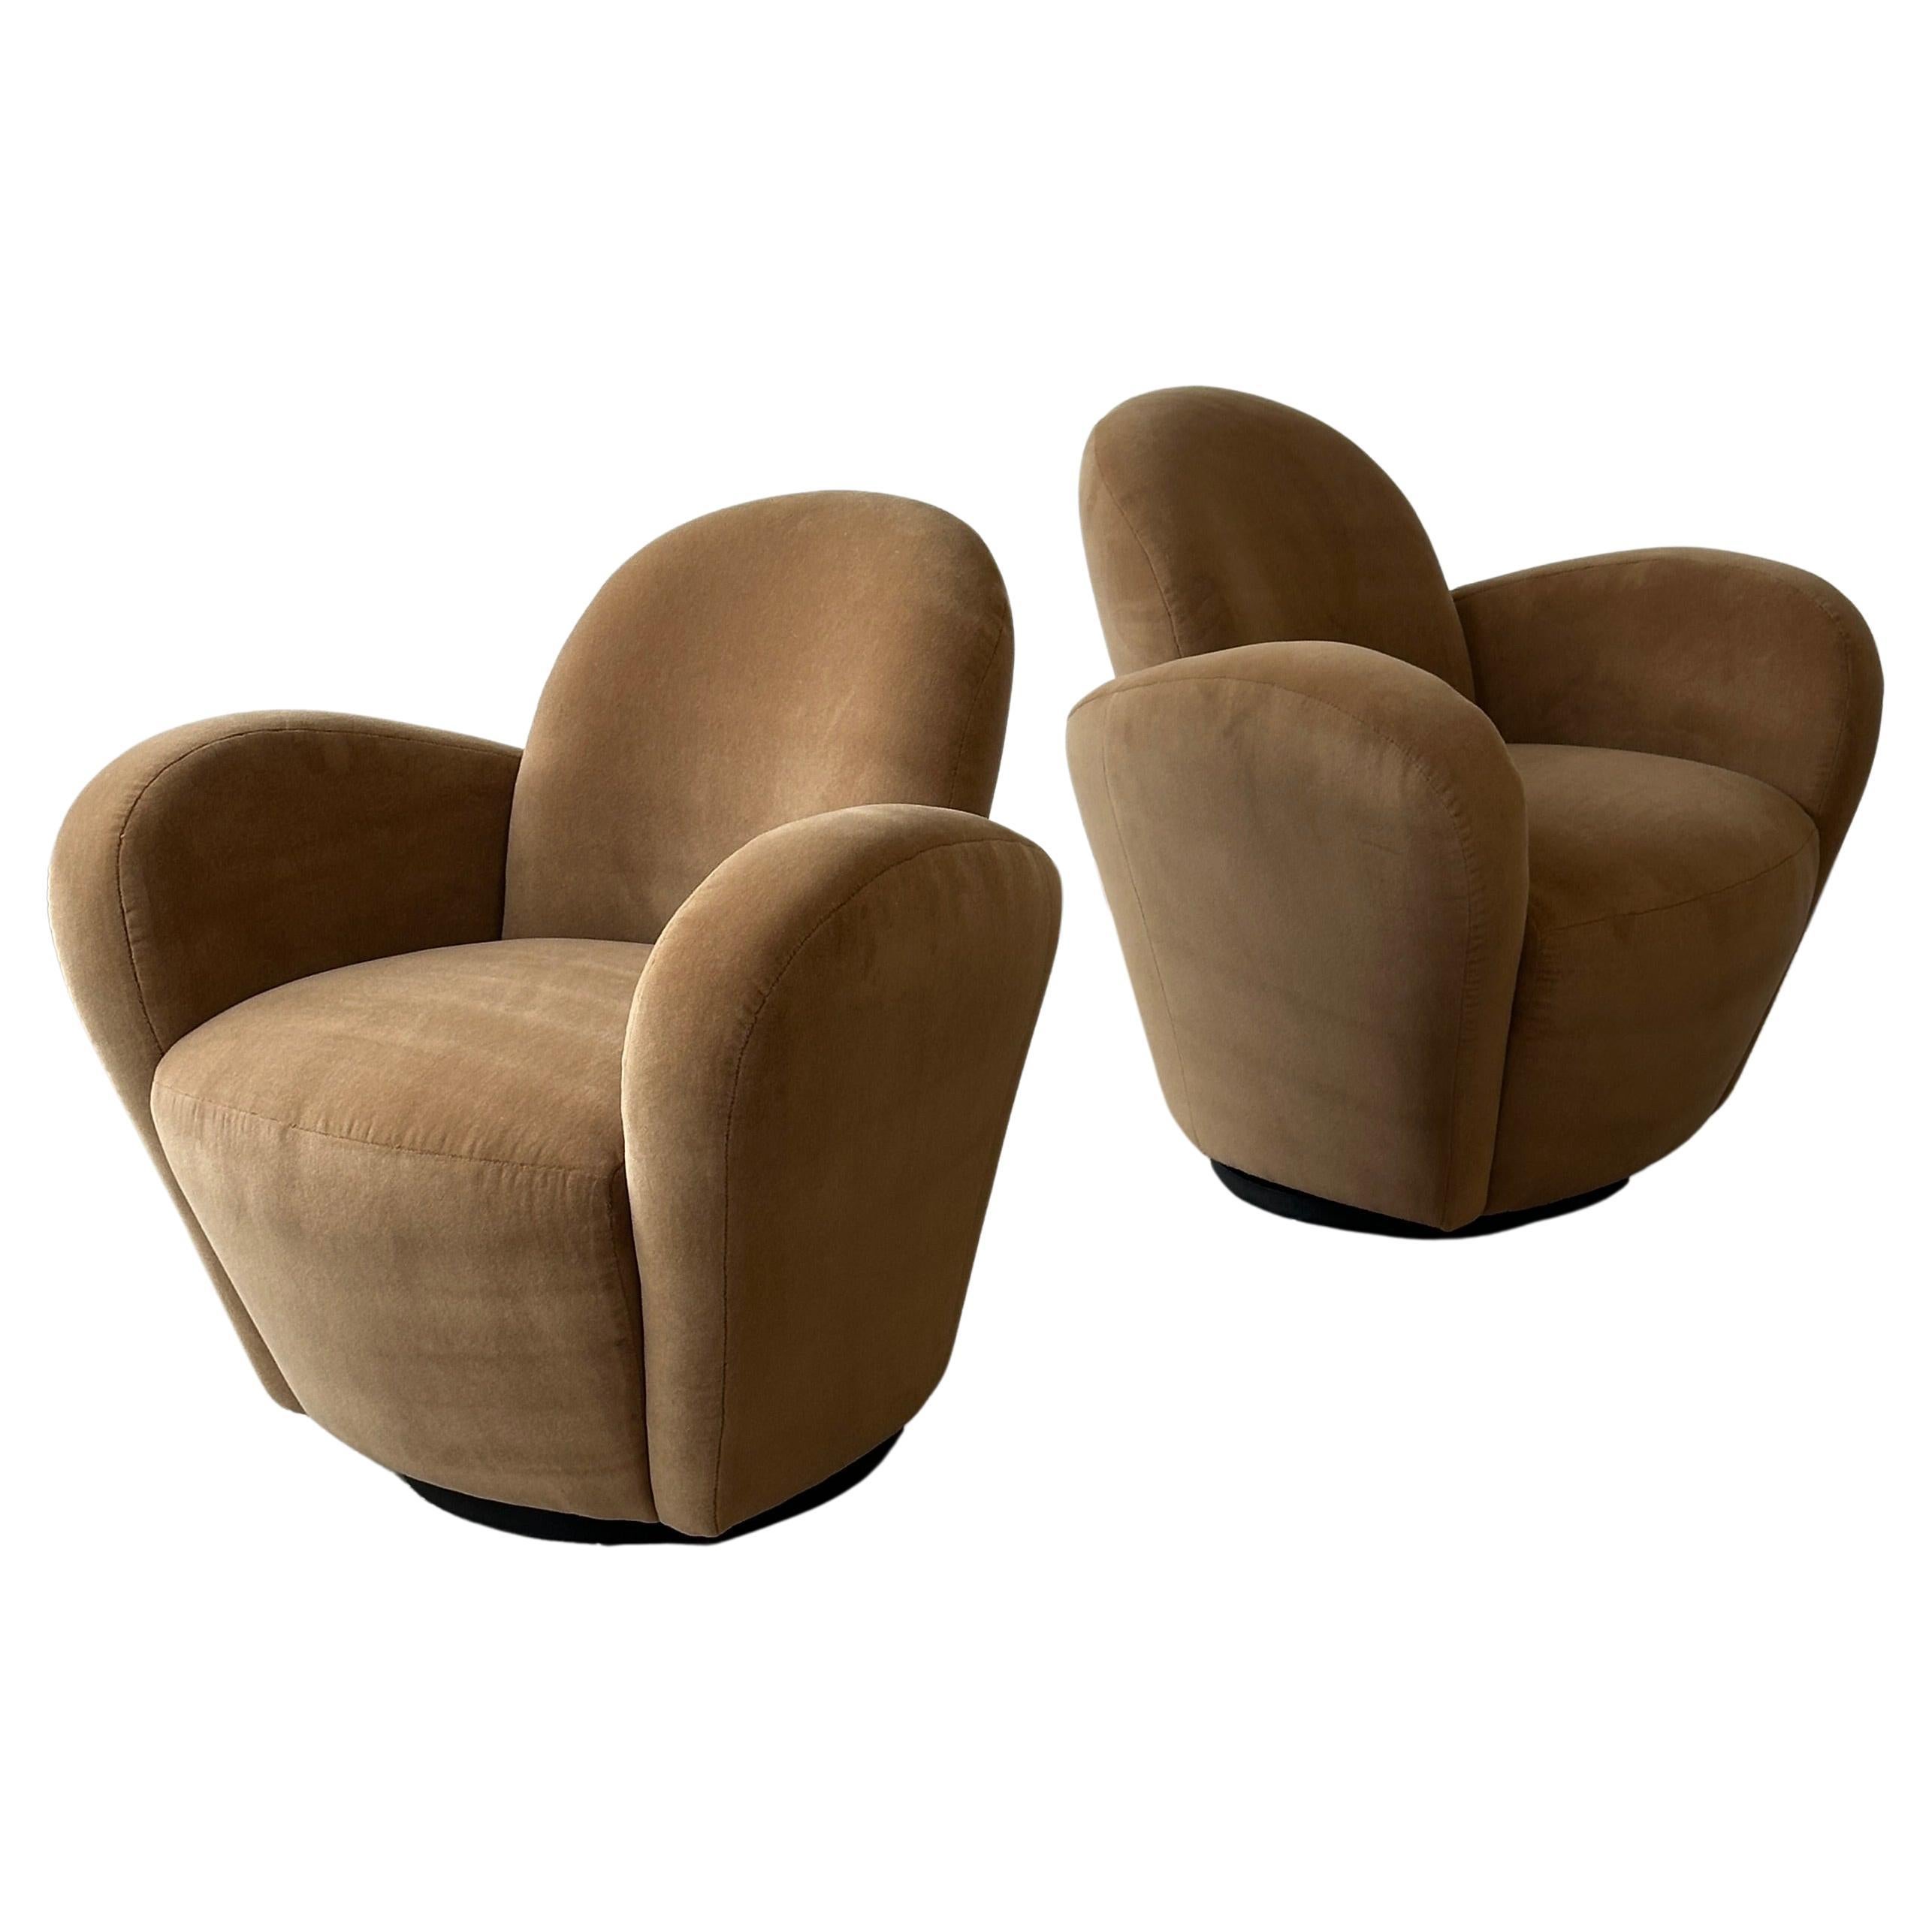 Michael Wolk “Miami” Chairs, a pair For Sale